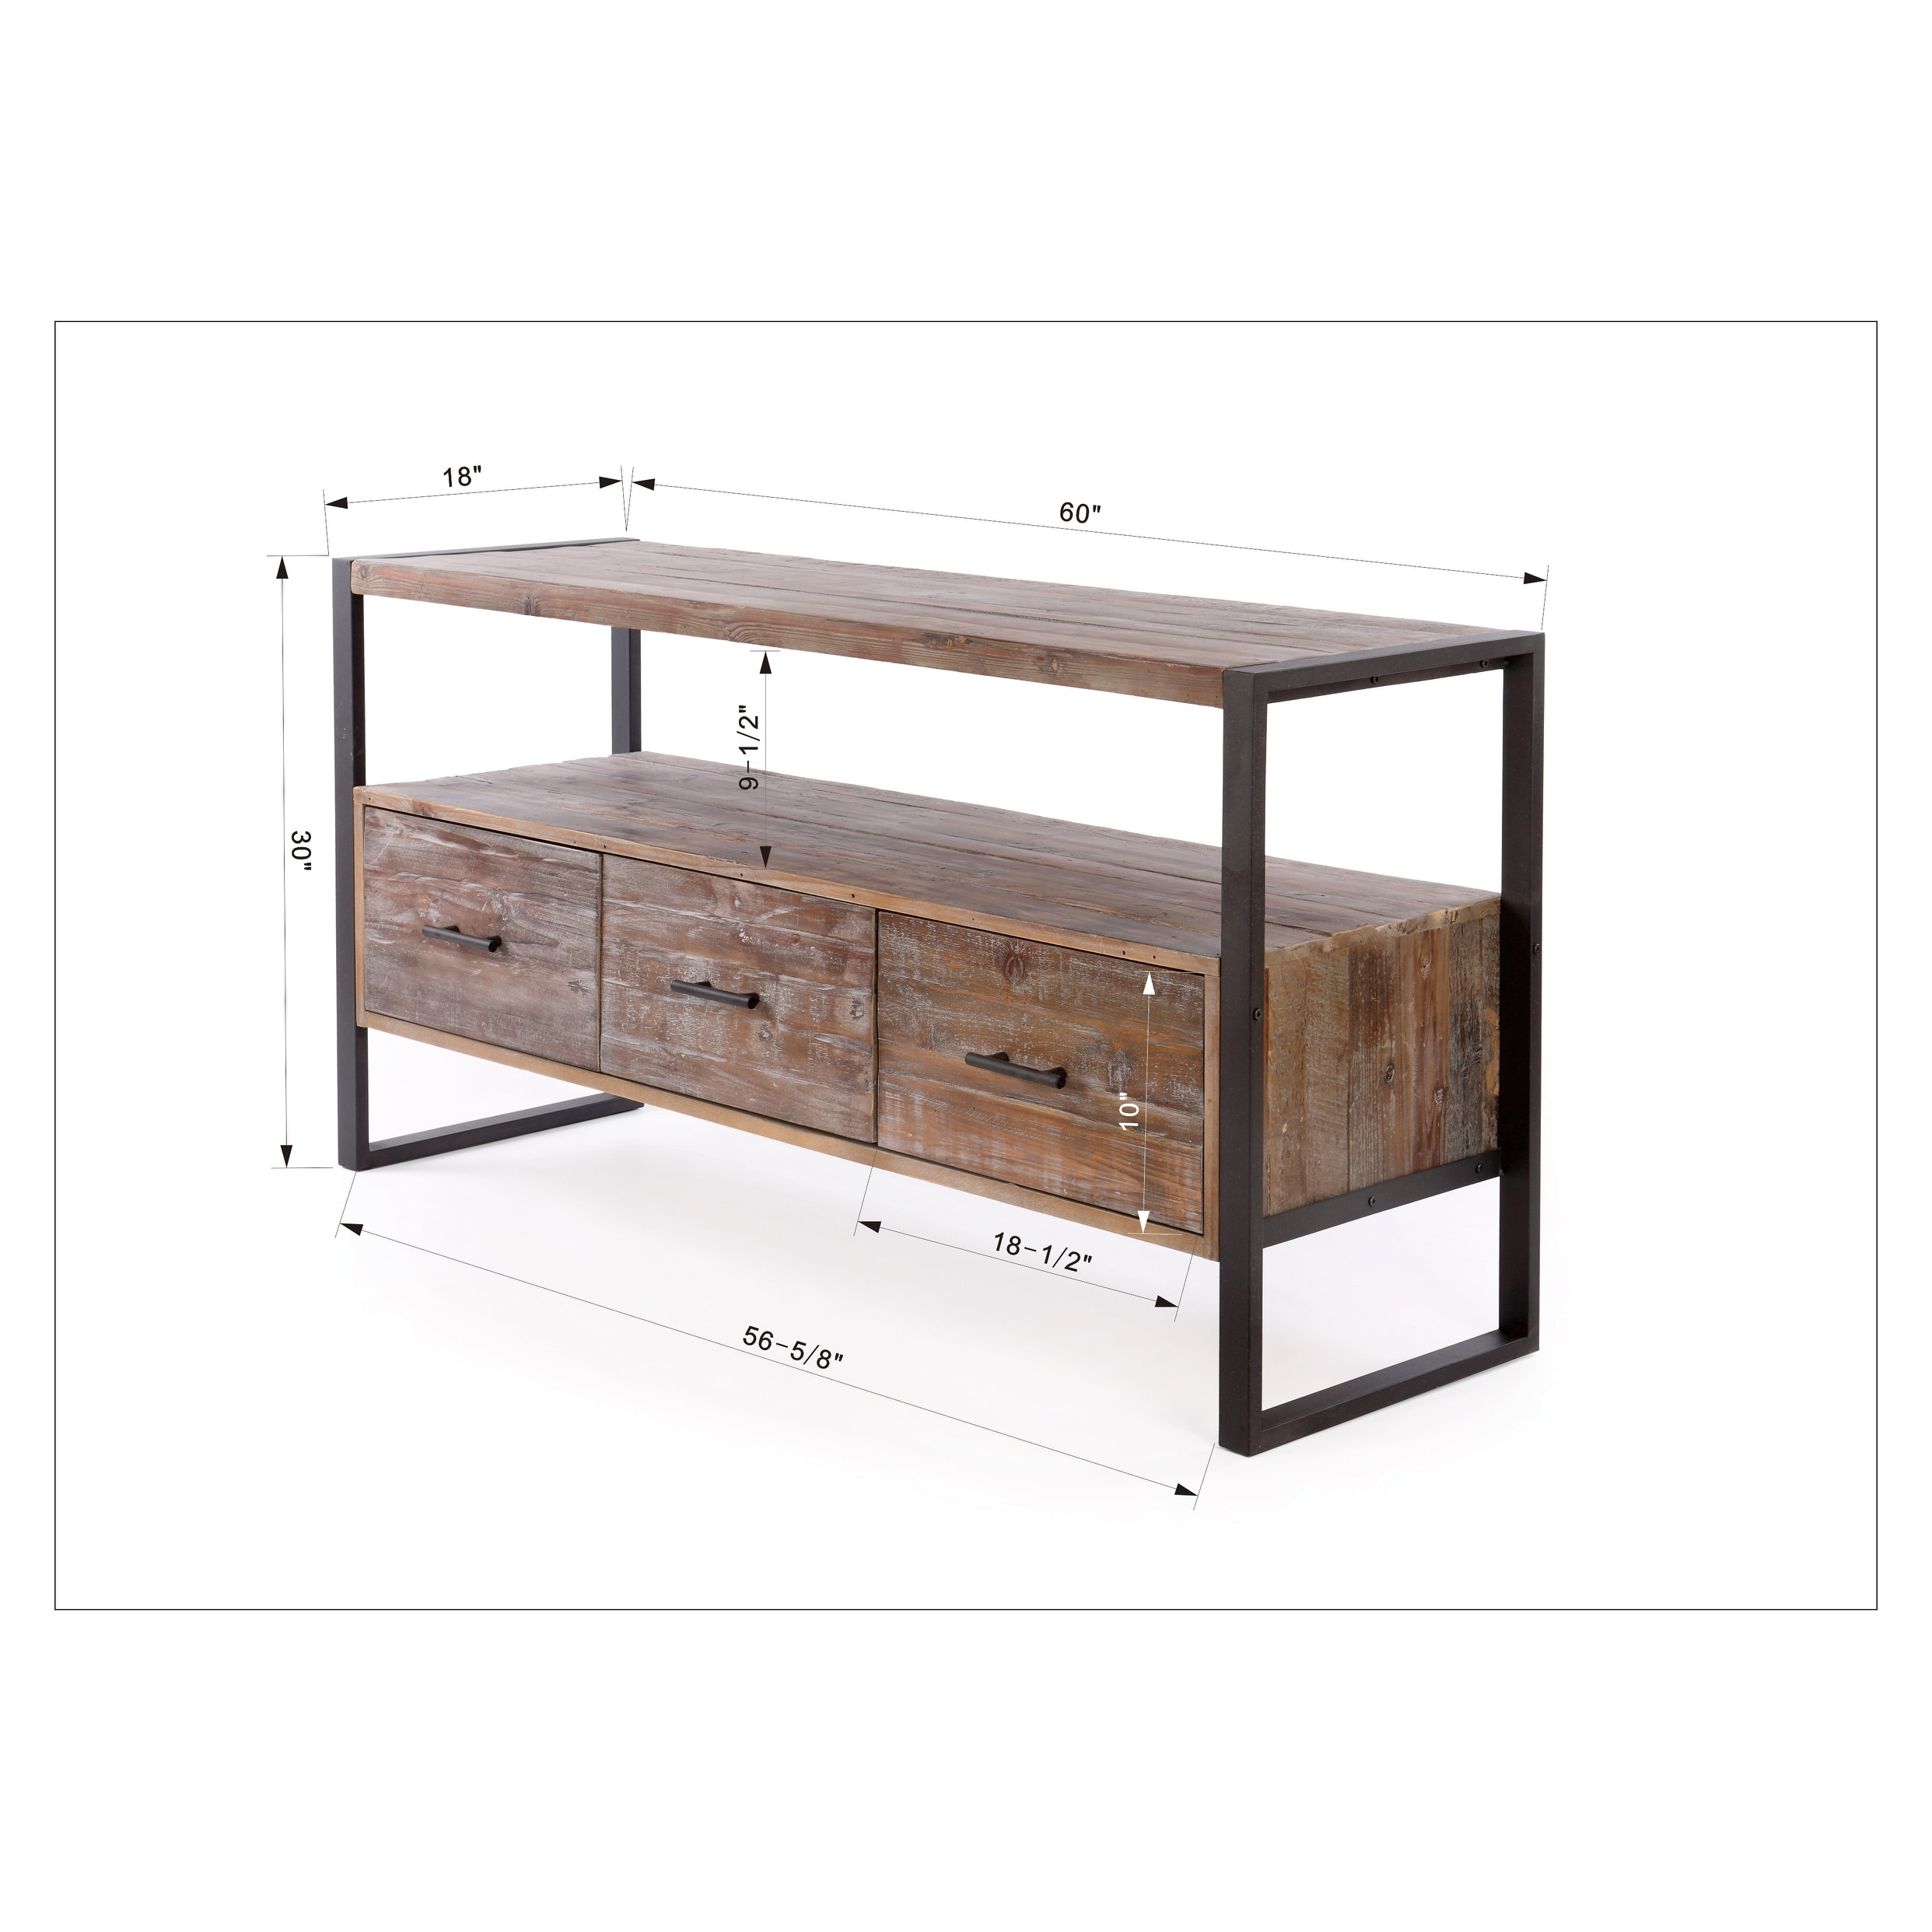 Rustic 60-Inch Reclaimed Wood TV Console Table with 3 Drawers